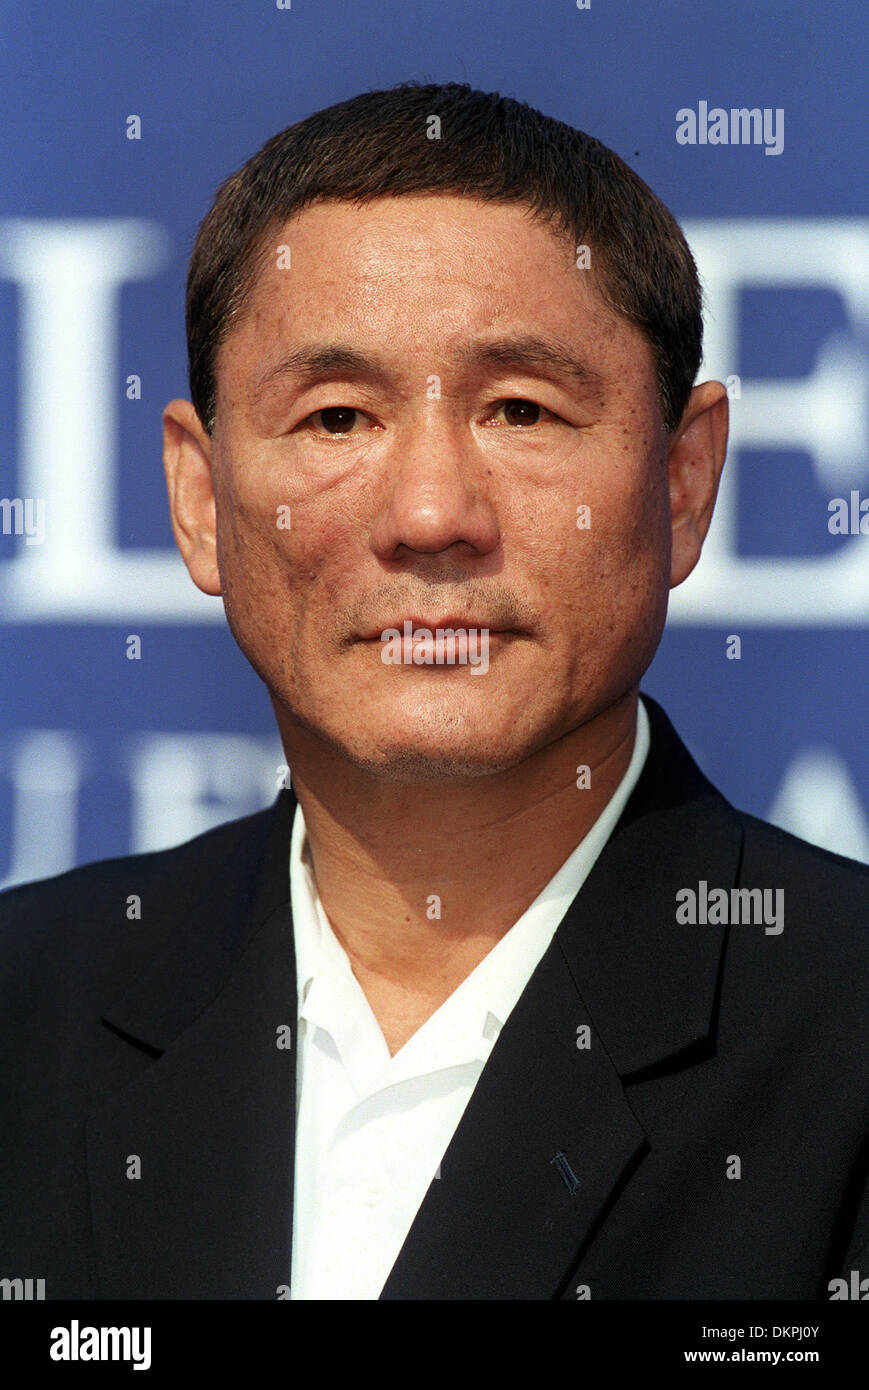 TAKESHI KITANO.FILM DIRECTOR.DEAUVILLE, FRANCE.05/09/2000.BB29F5C. Stock Photo